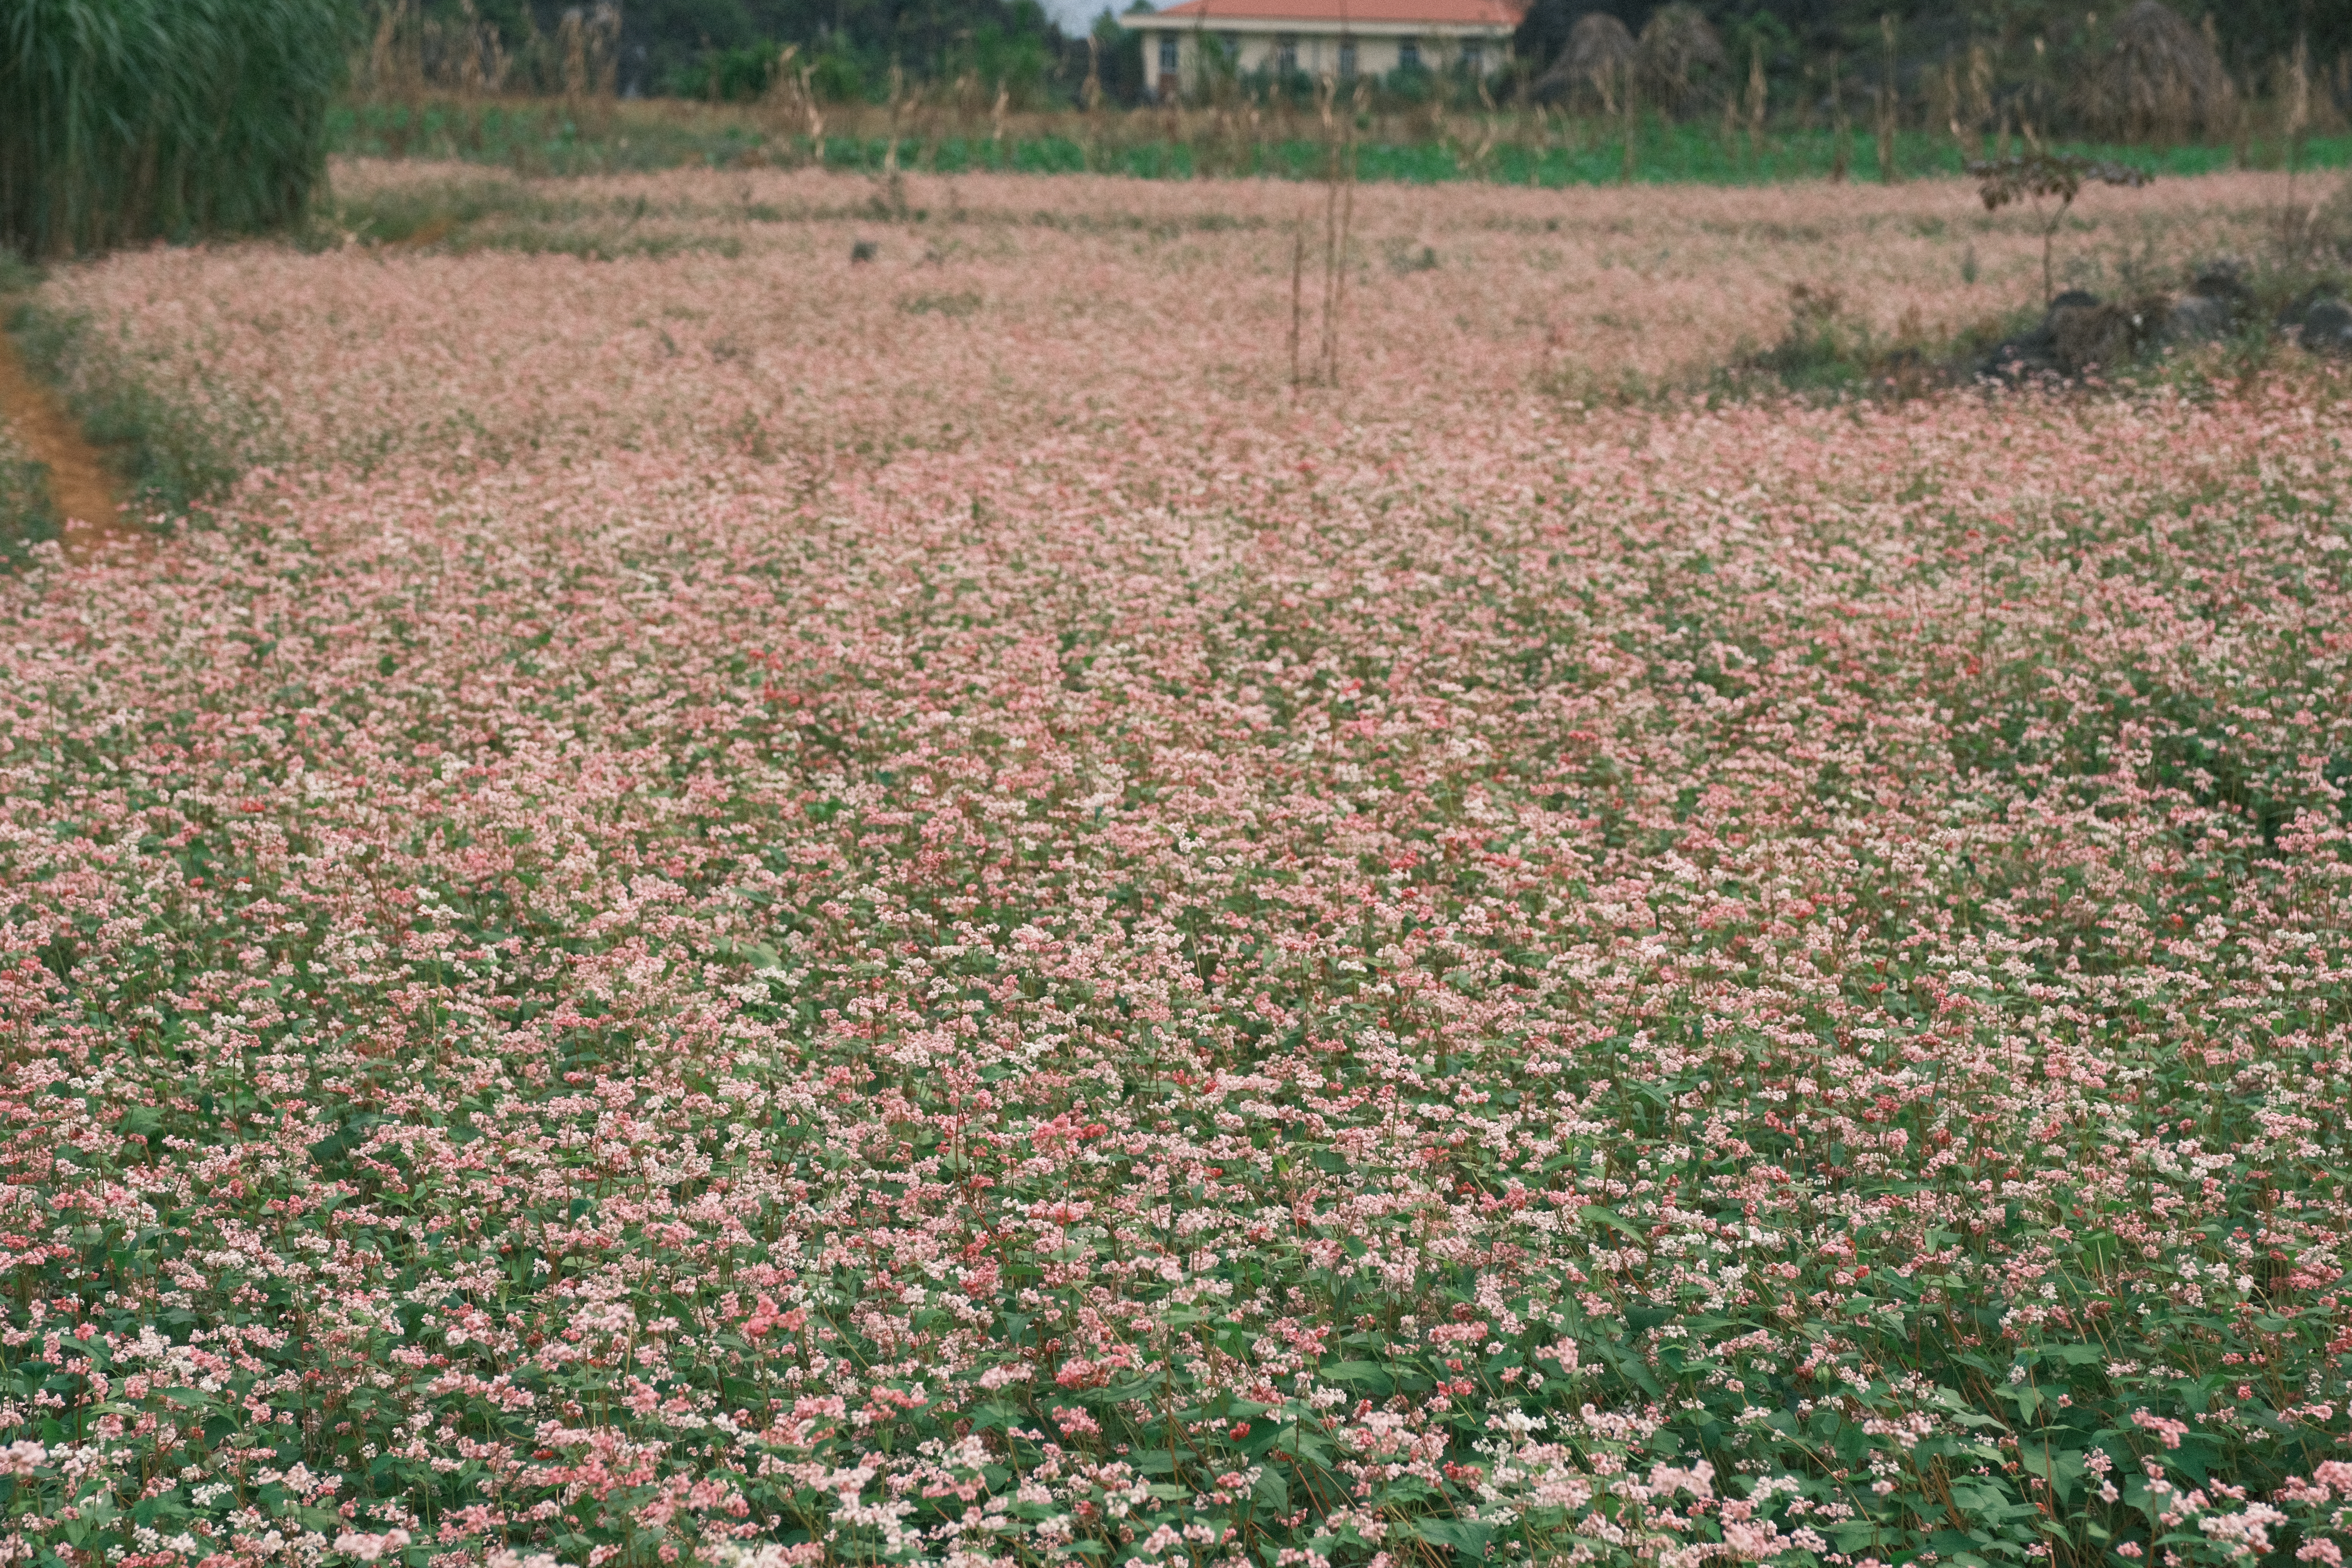 The flowering buckwheat field in Dong Van district, Ha Giang province, in a photo provided by the JVGA.